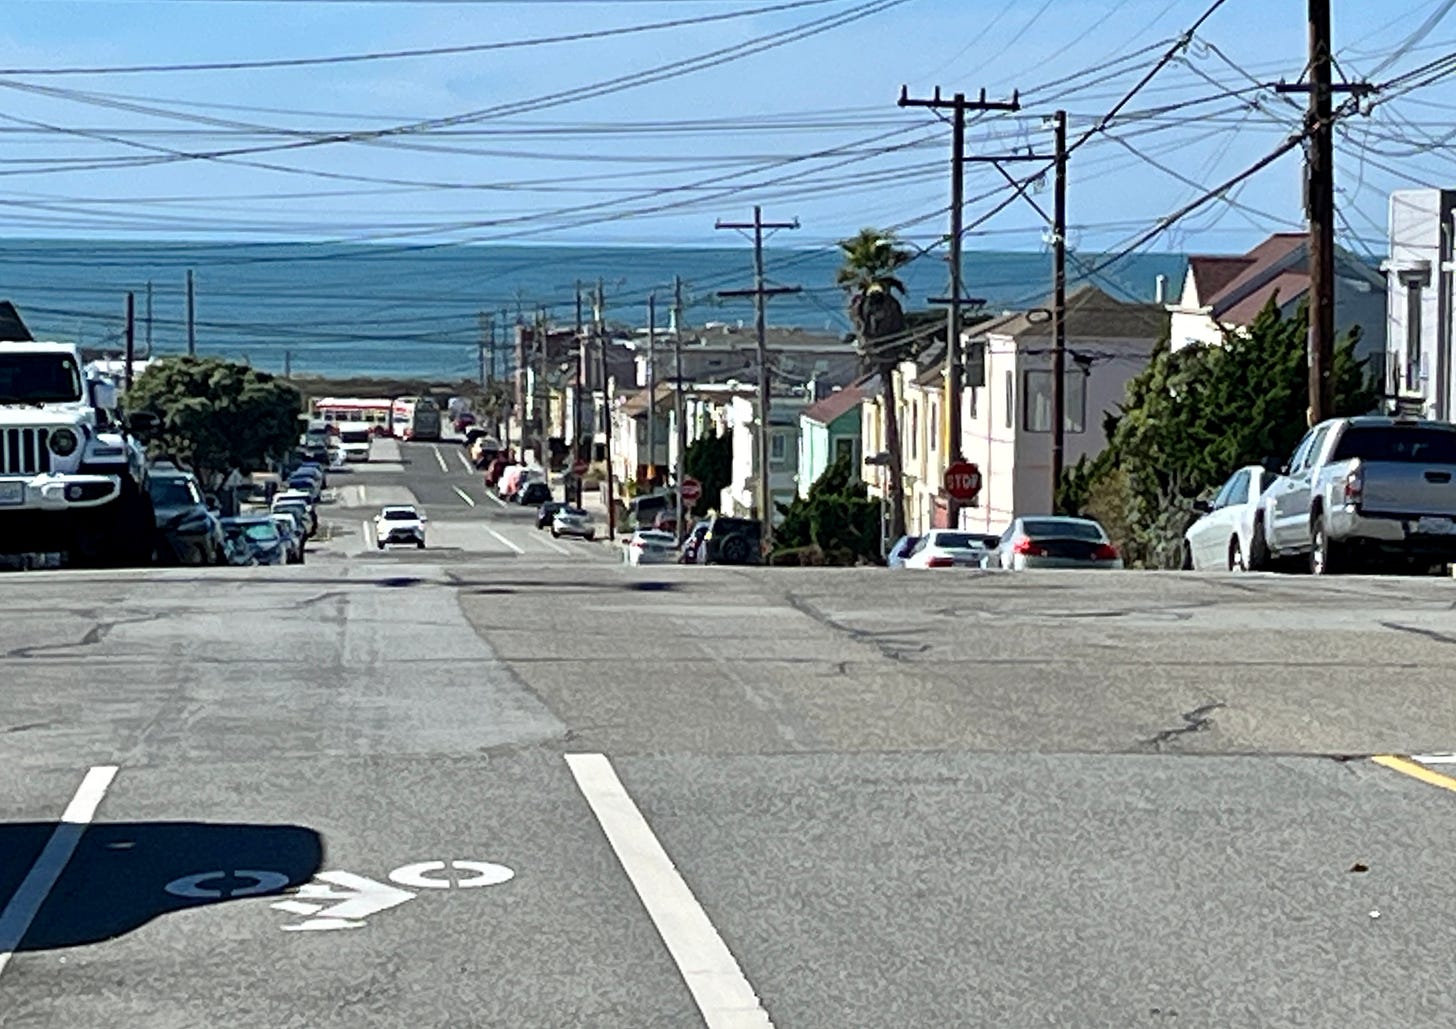 Looking down our street at the Pacific Ocean